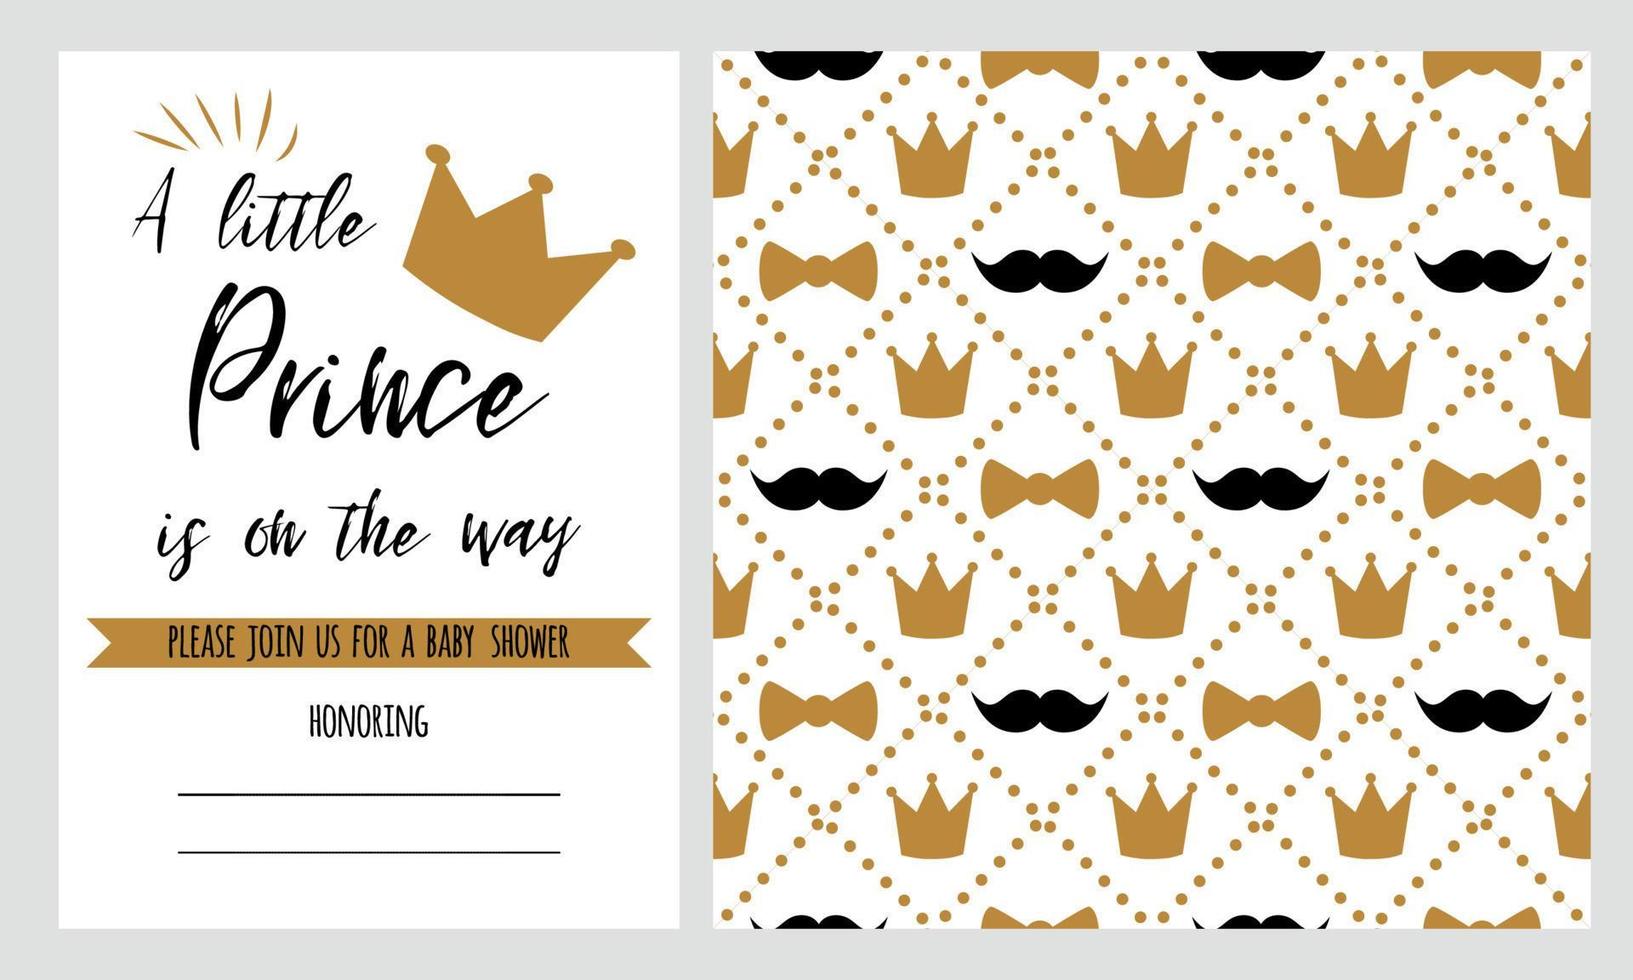 Baby Shower invitation design Hipster black moustache golden bow tie gold crow seamless pattern background Little Prince set for children birthday party congratulation invitation Vector illustration.